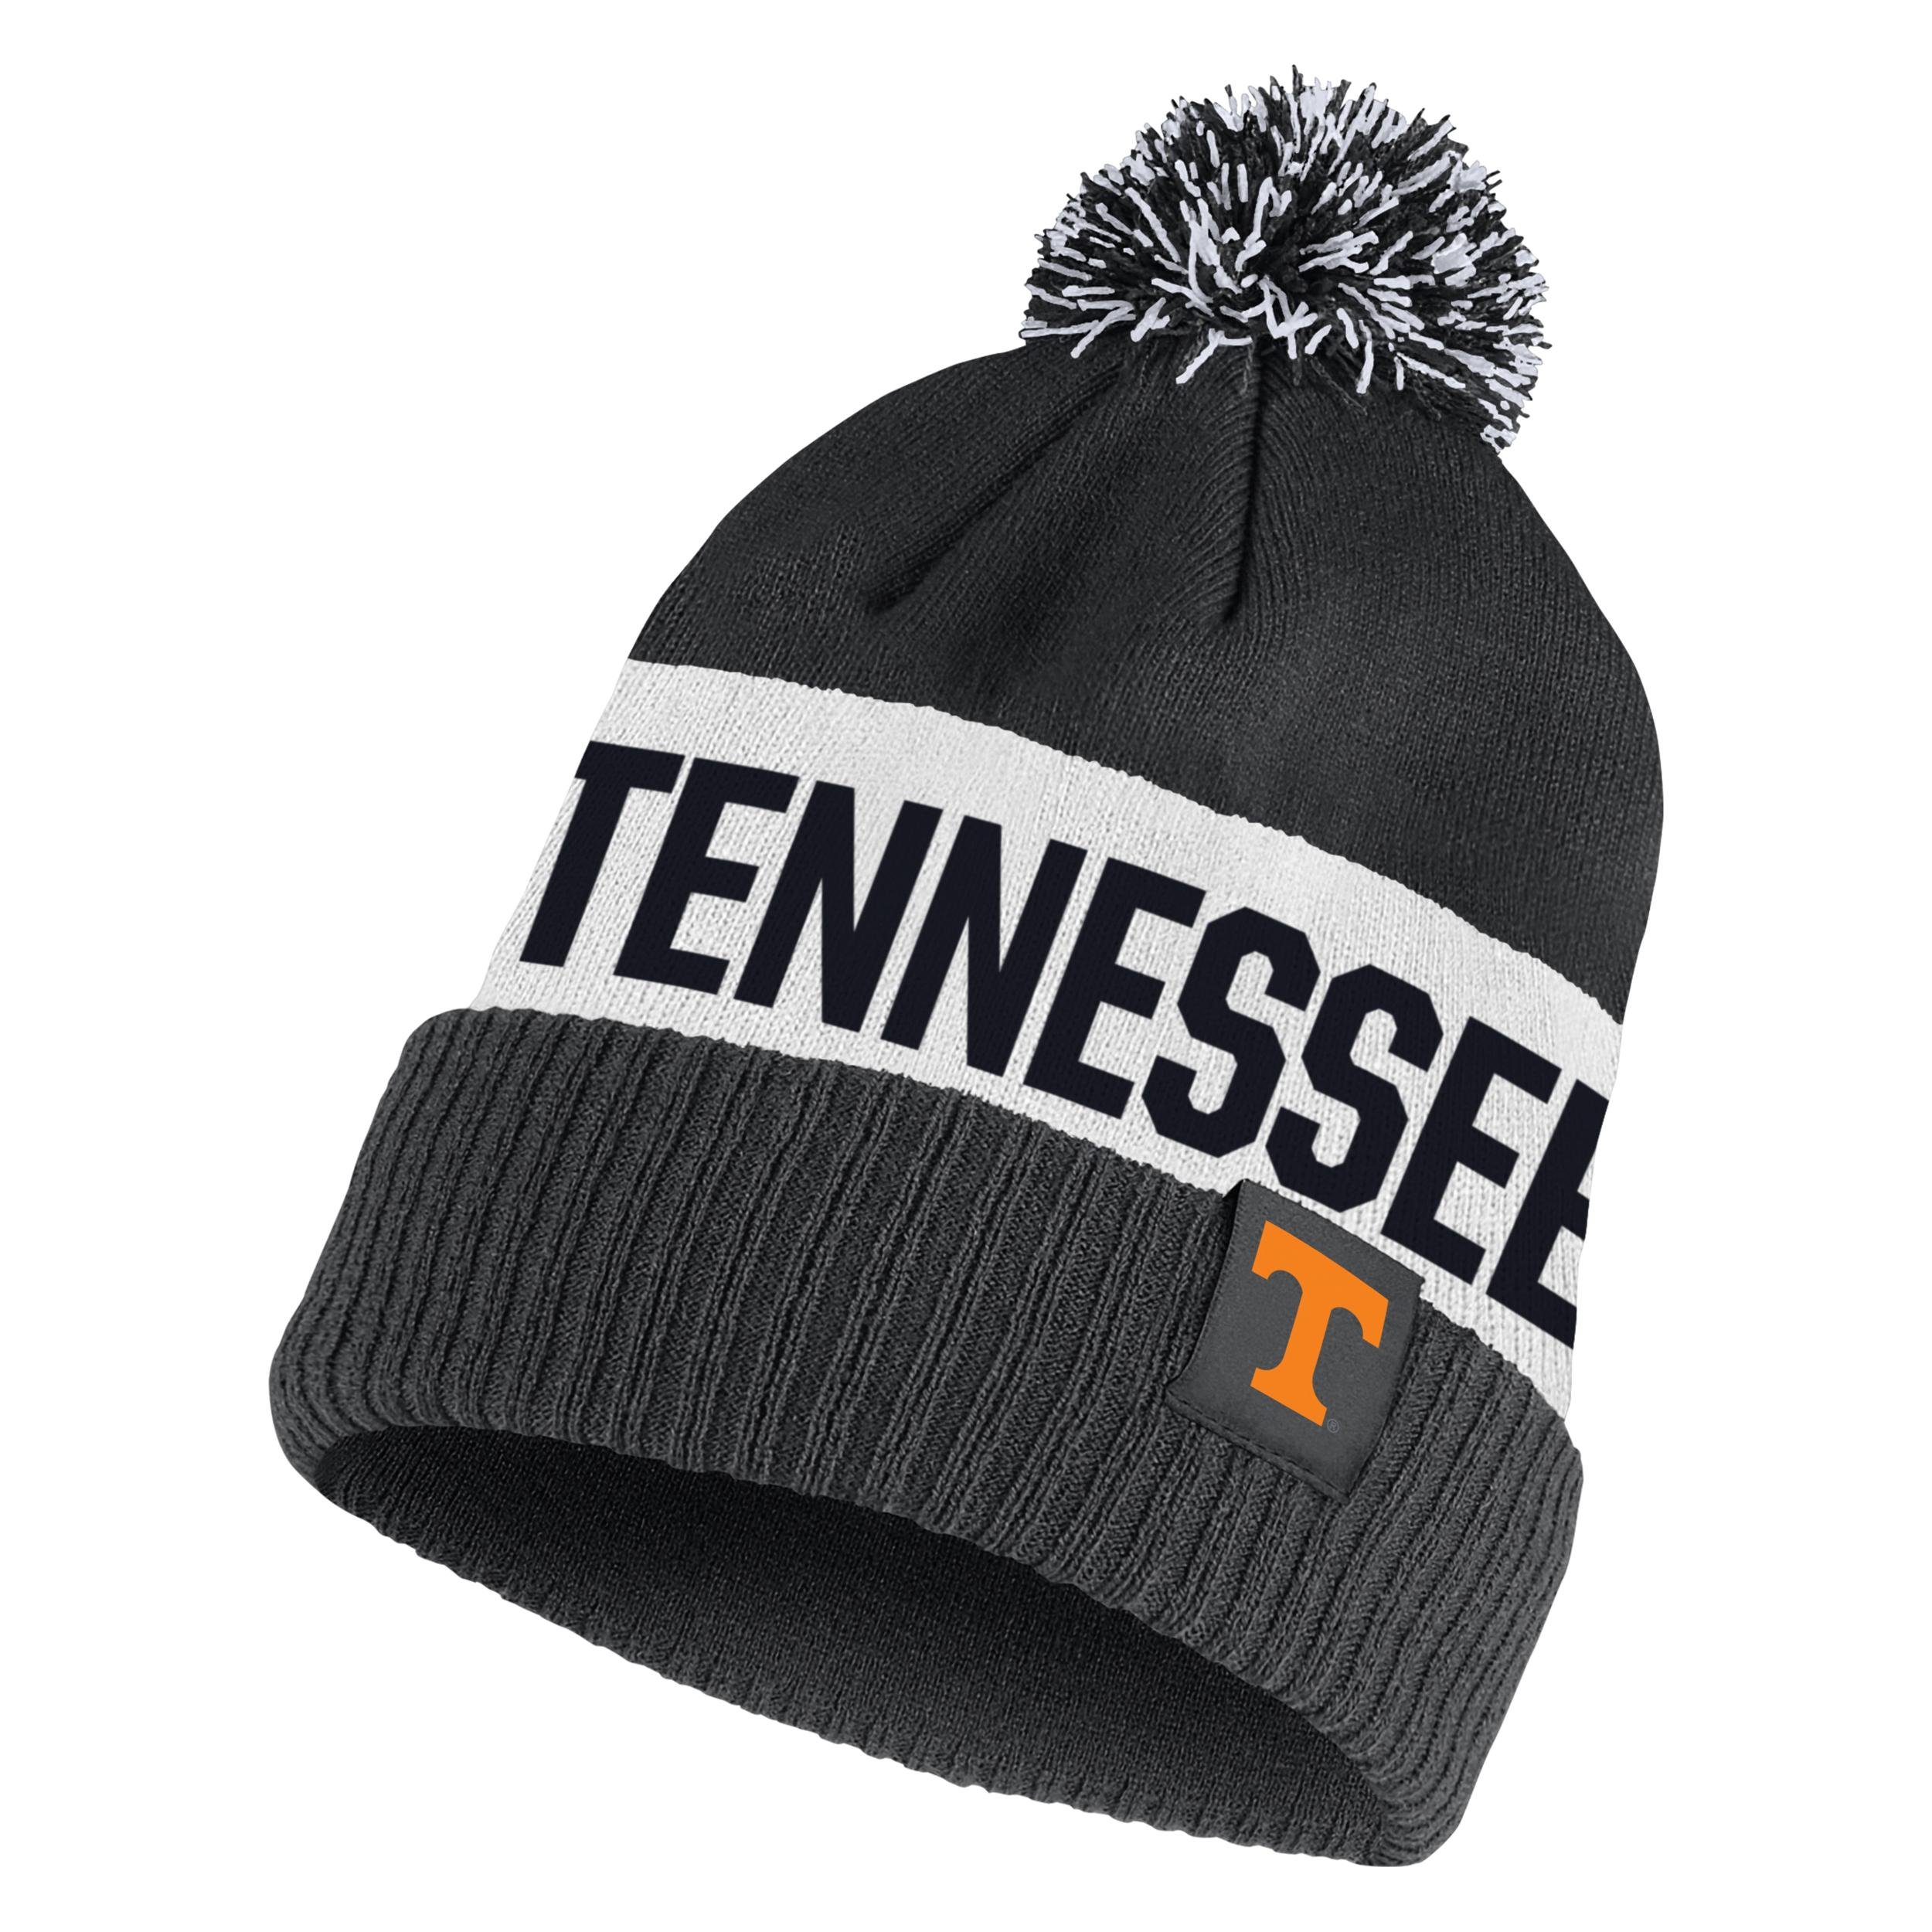 Tennessee Nike Unisex College Beanie by NIKE